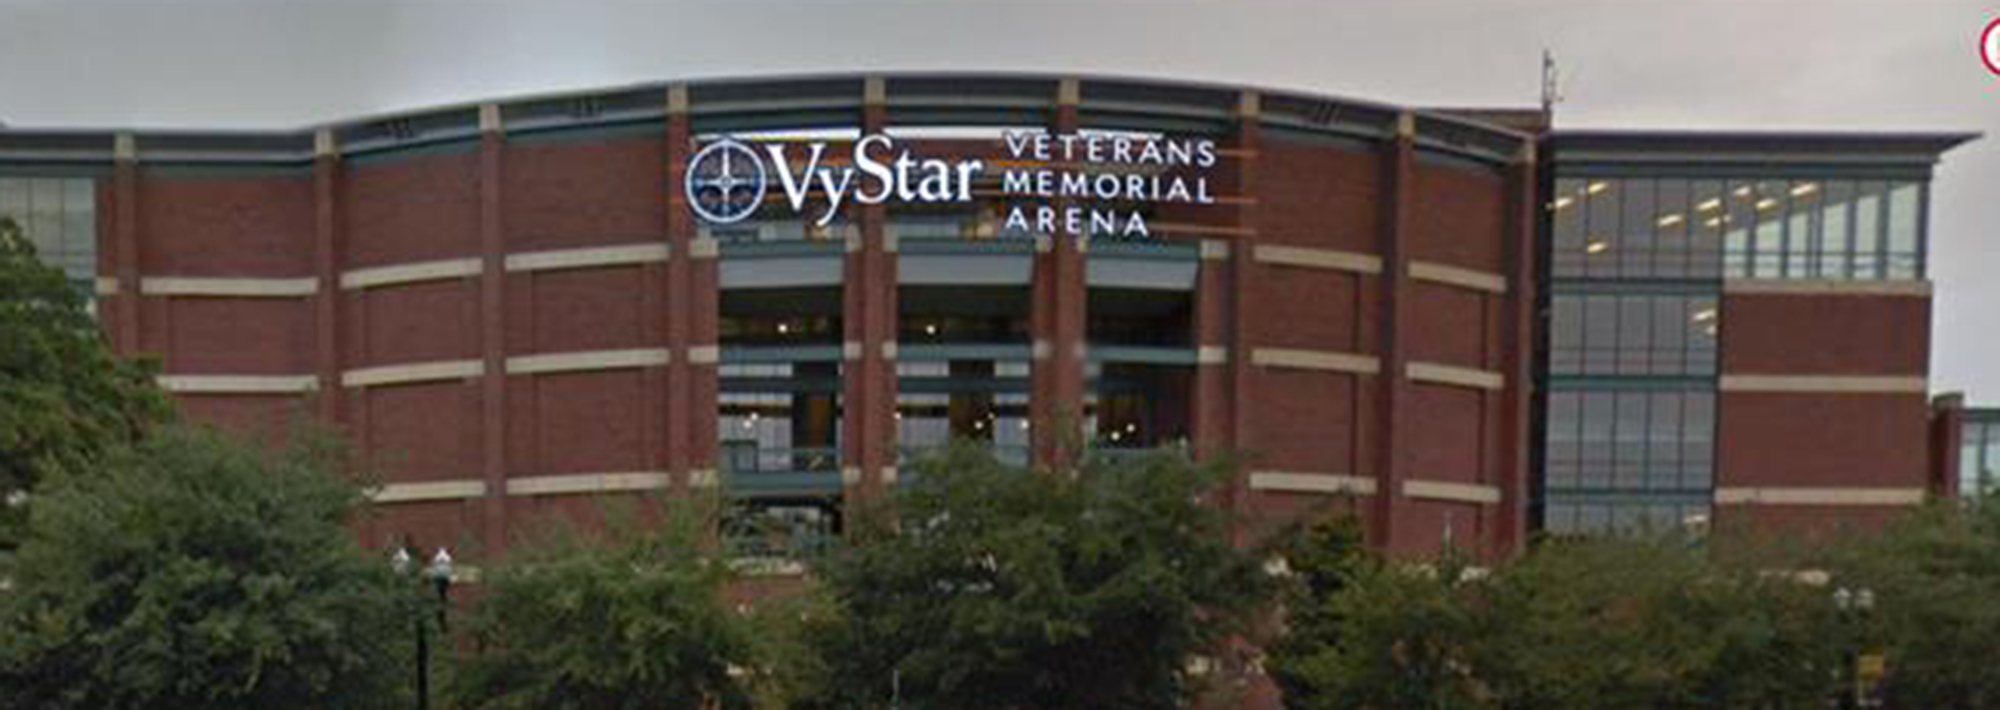 The Downtown Development Review Board gave unanimous final design approval for new VyStar Veterans Memorial Arena signs.